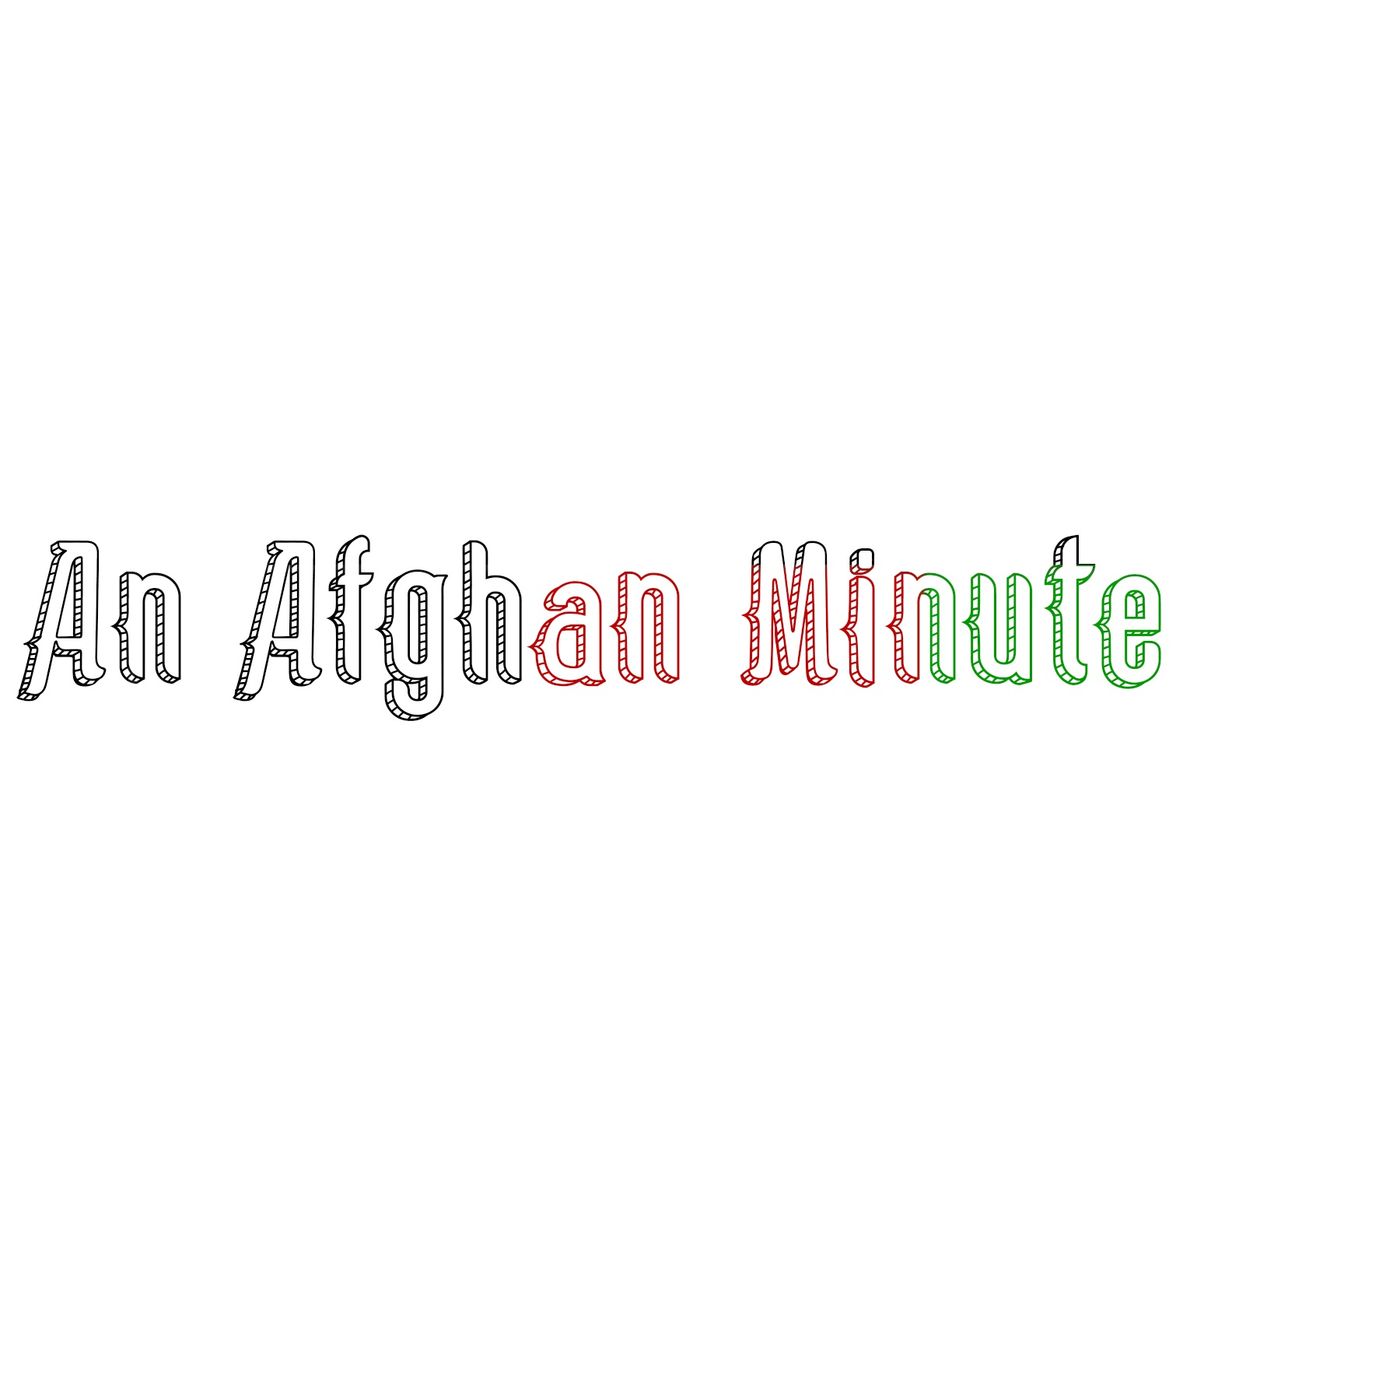 Episode 2. Afghan minutes - Sep 2021 Edition - 9:14:21, 1.12 PM